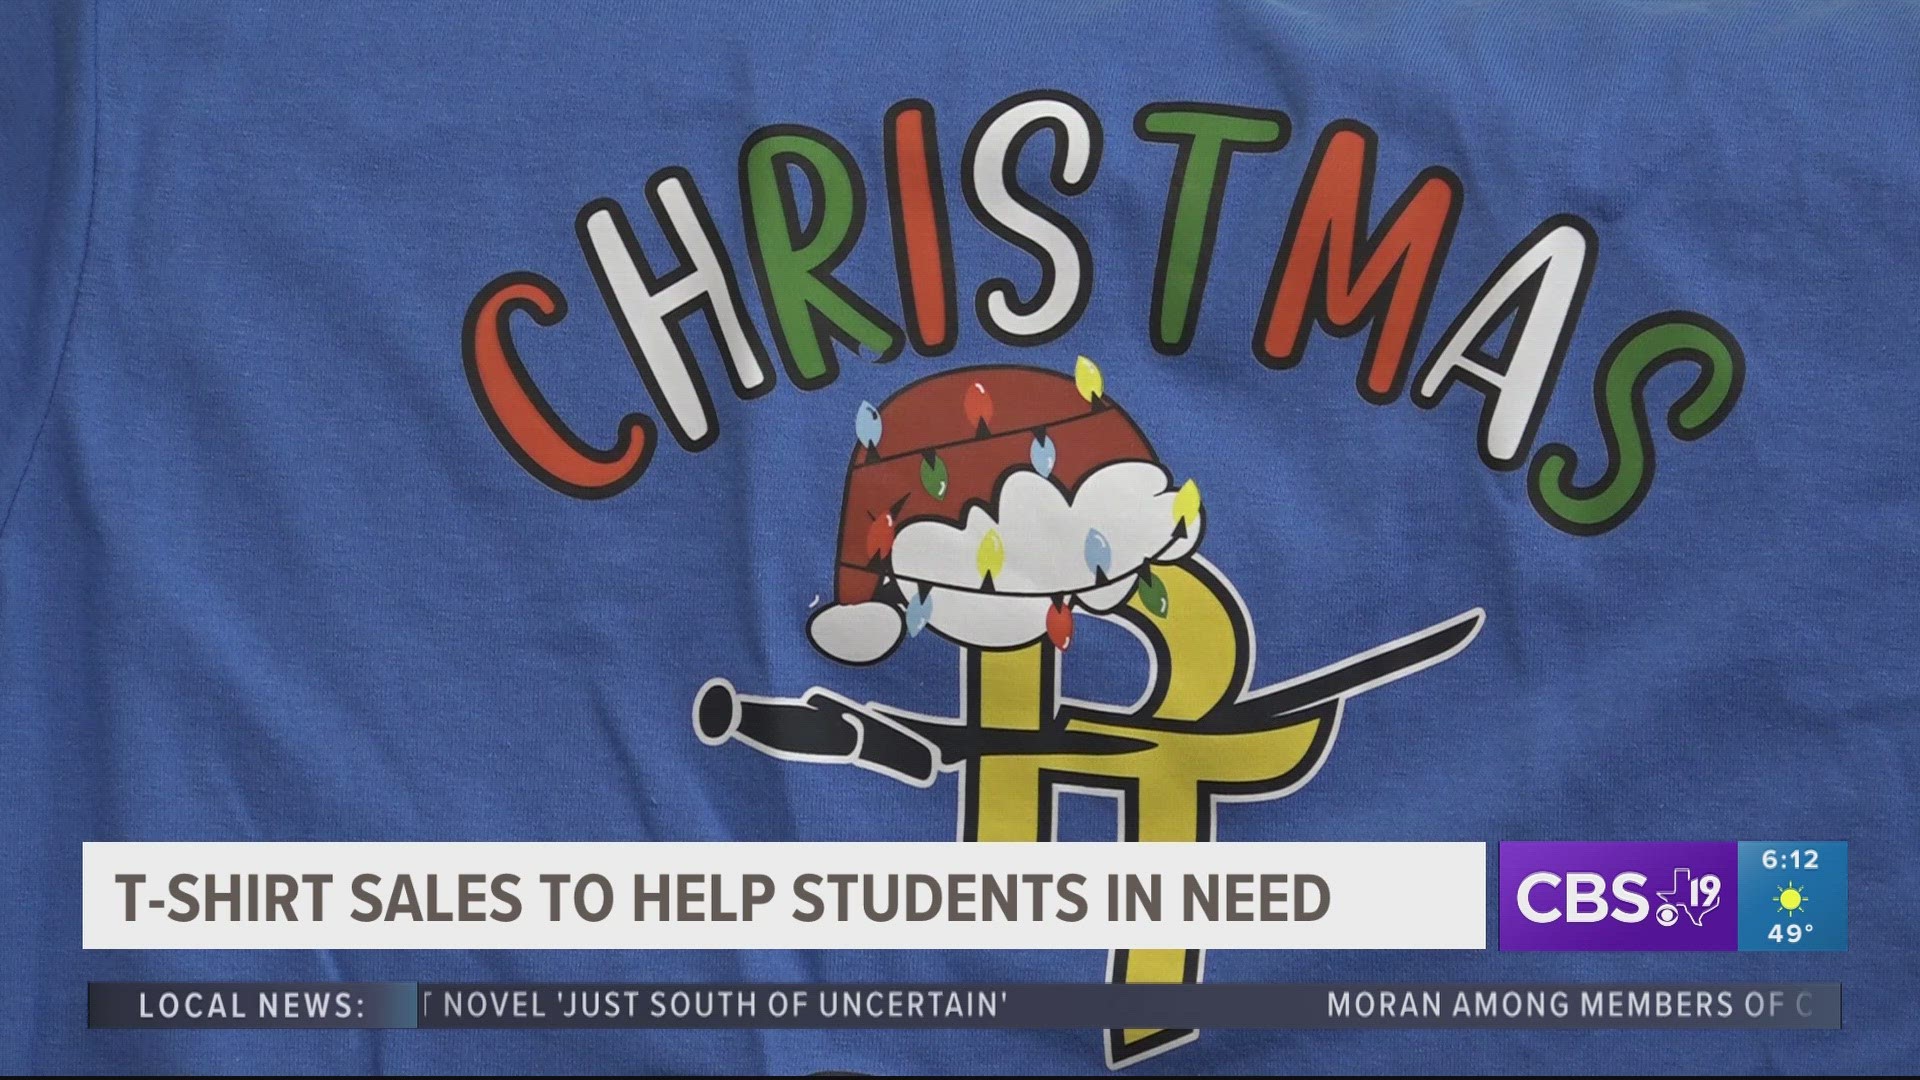 Pine Tree ISD fundraising to gift less fortunate students presents this Christmas